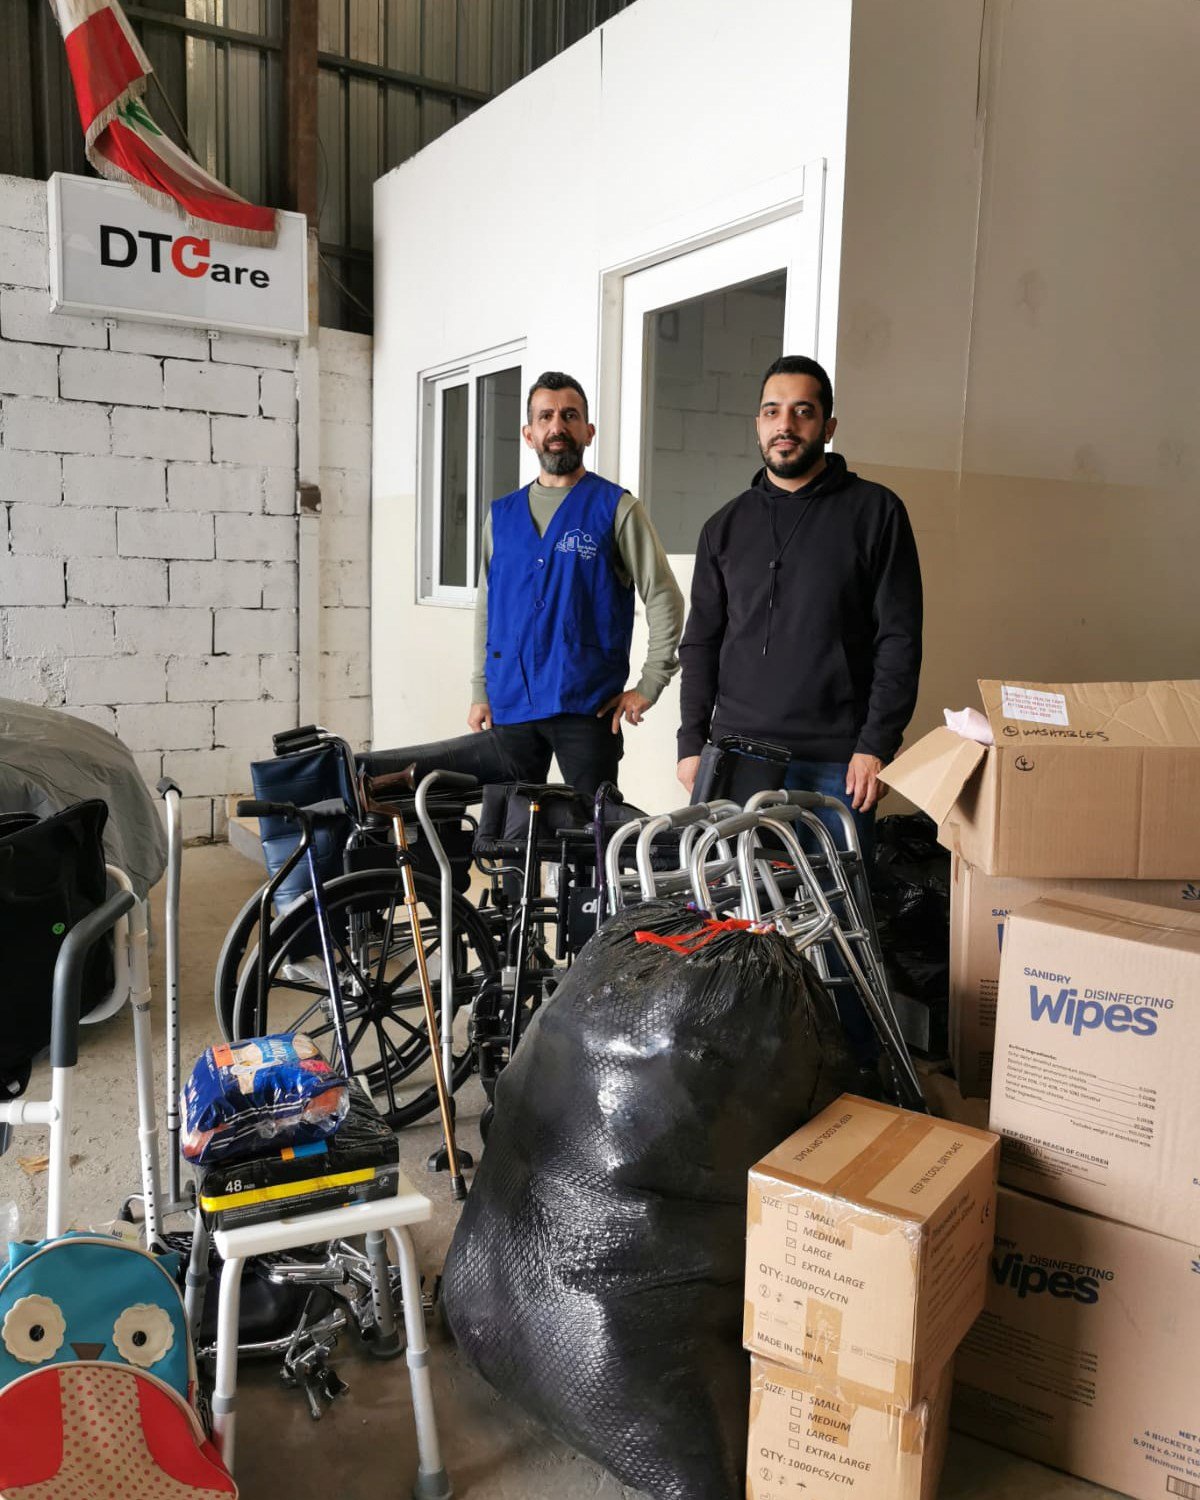 📦🚚 Our latest container has arrived, and distributions have officially begun! DTCare proudly works with both individual families and fellow nonprofit organizations to provide humanitarian, medical, and mobility supplies to those in desperate need. 